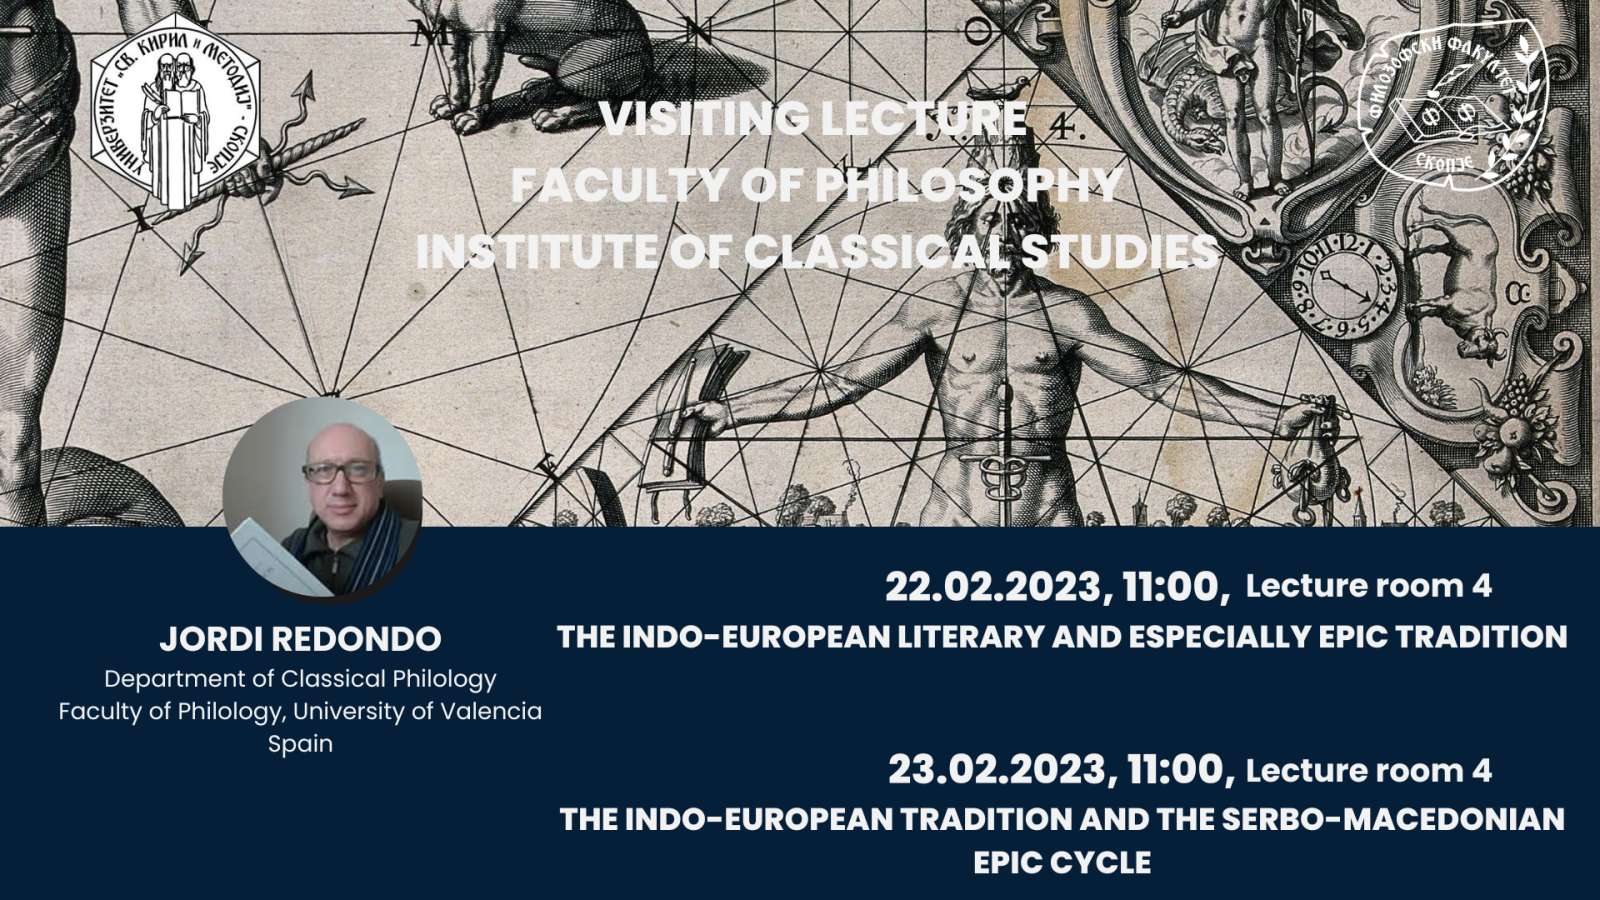 visiting-lecture-faculty-of-philosophy-institute-of-classical-studies